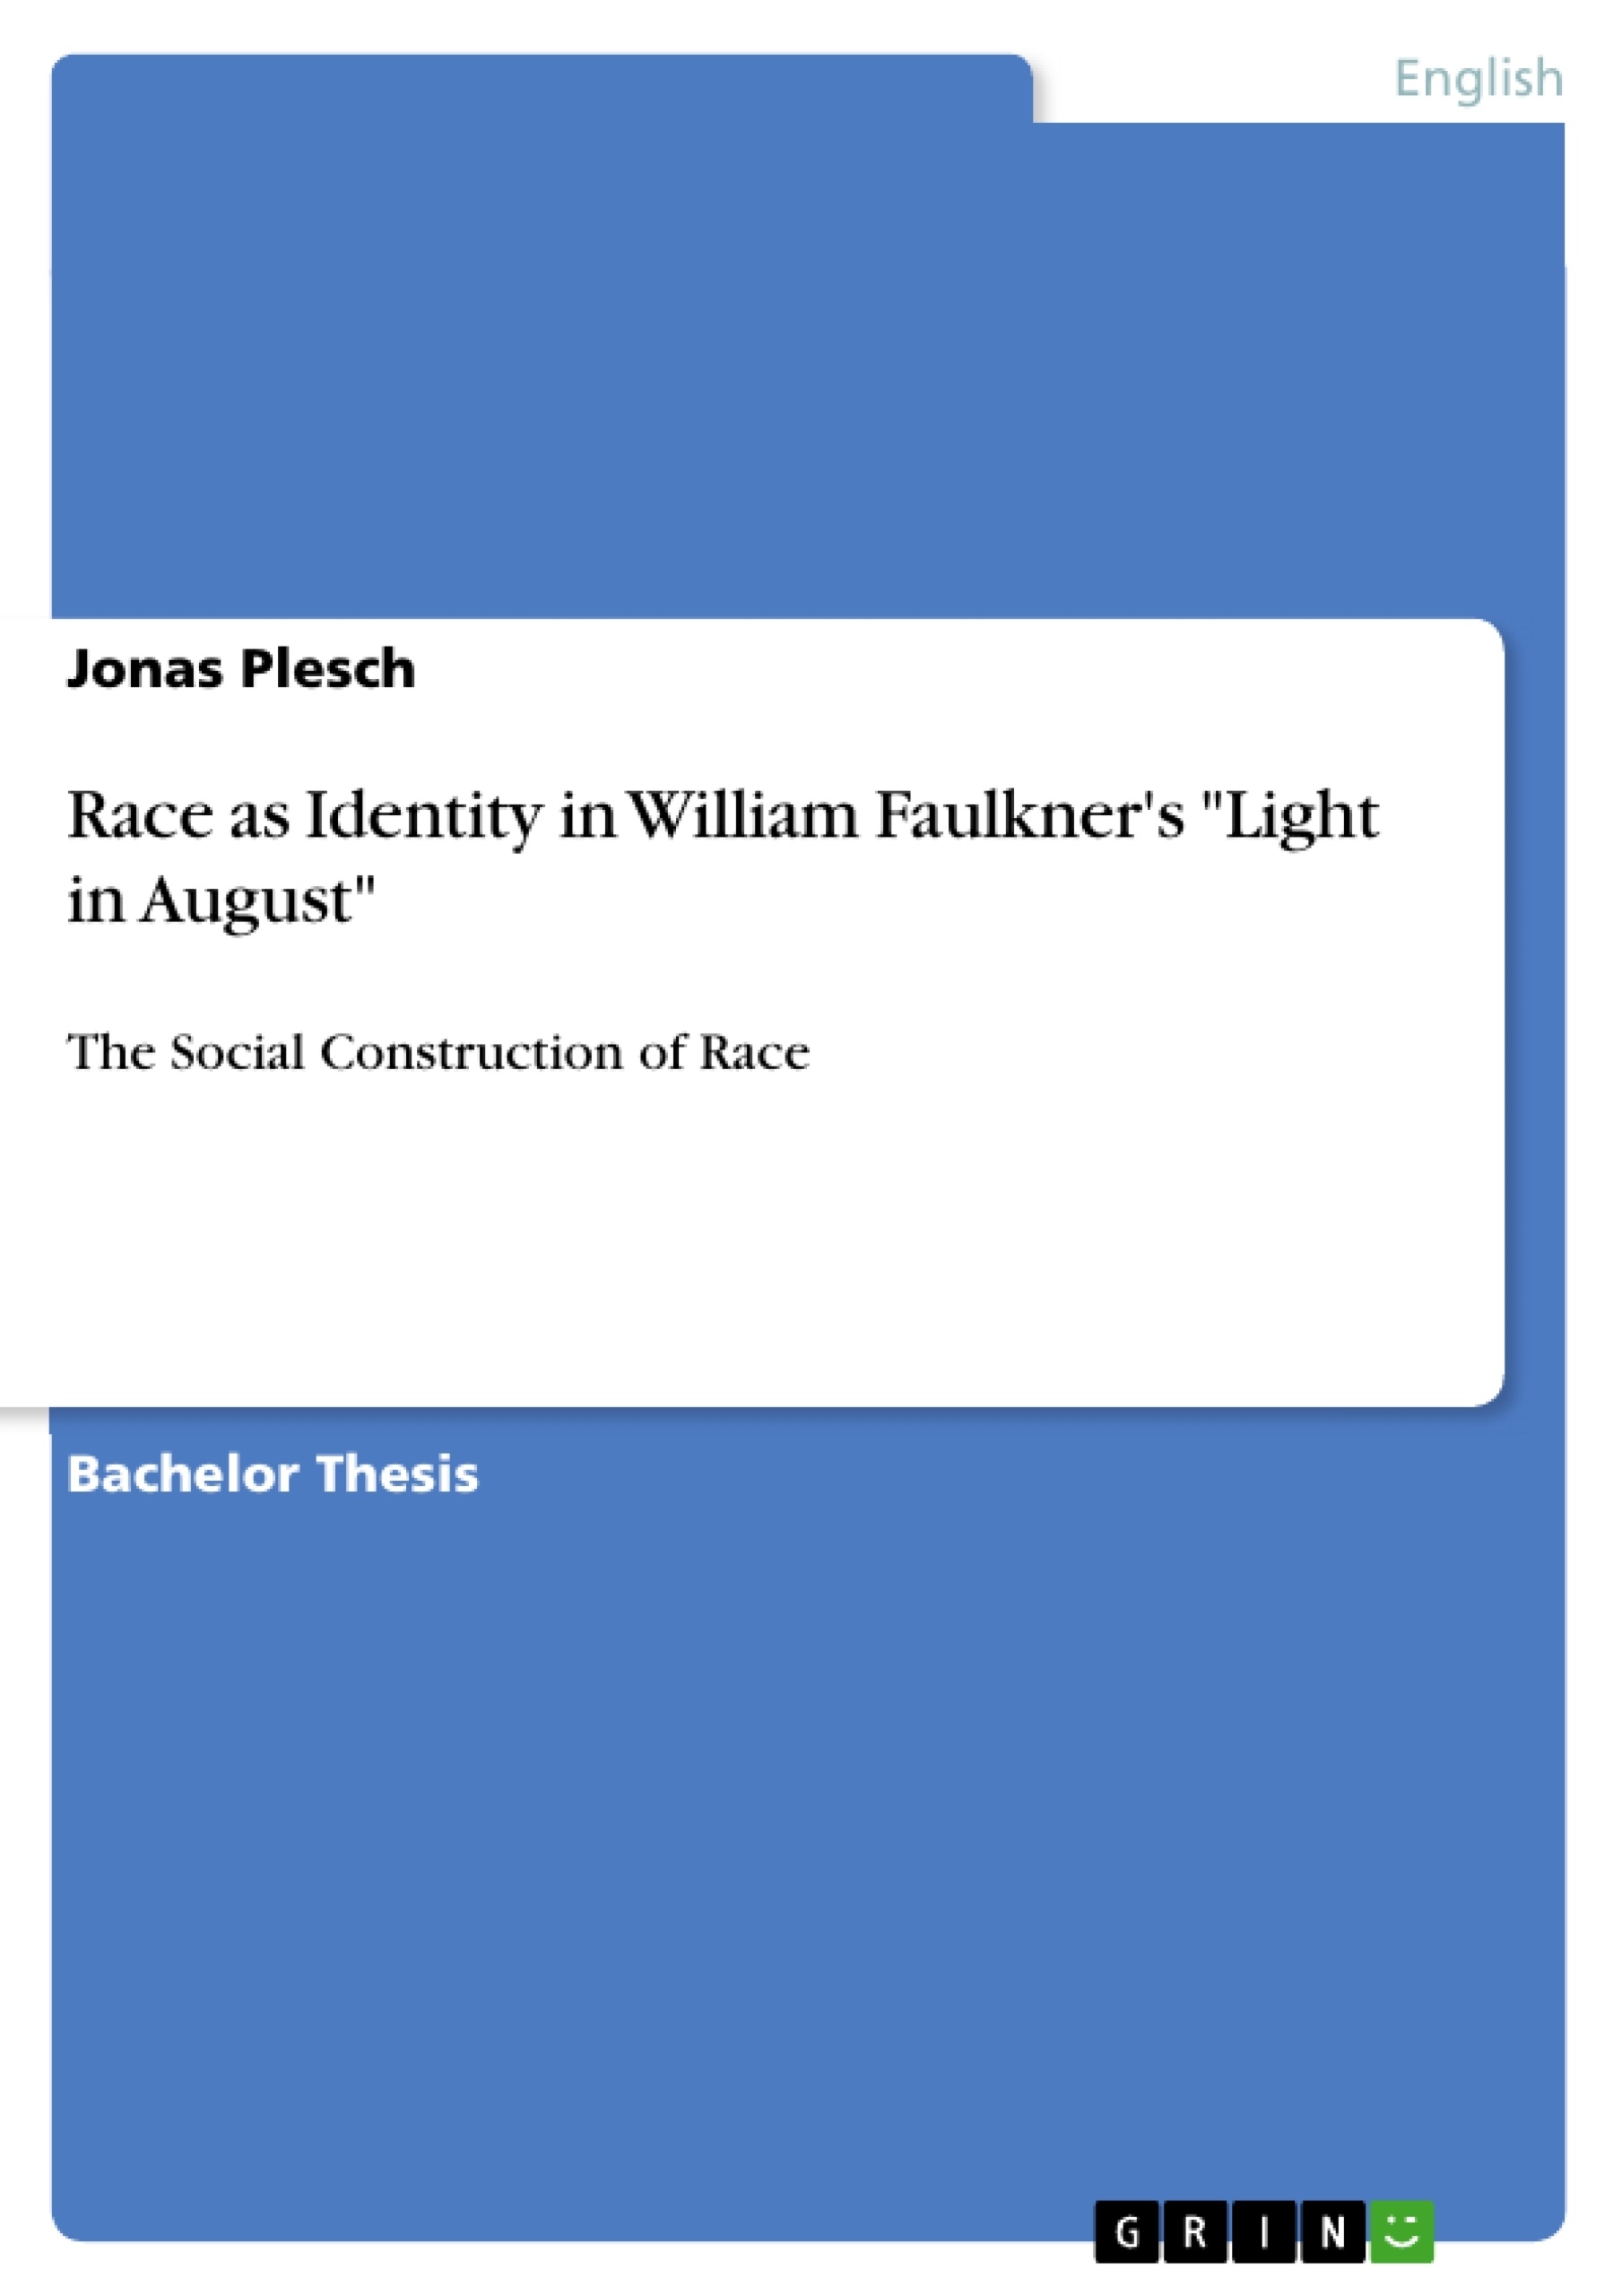 Title: Race as Identity in William Faulkner's "Light in August"